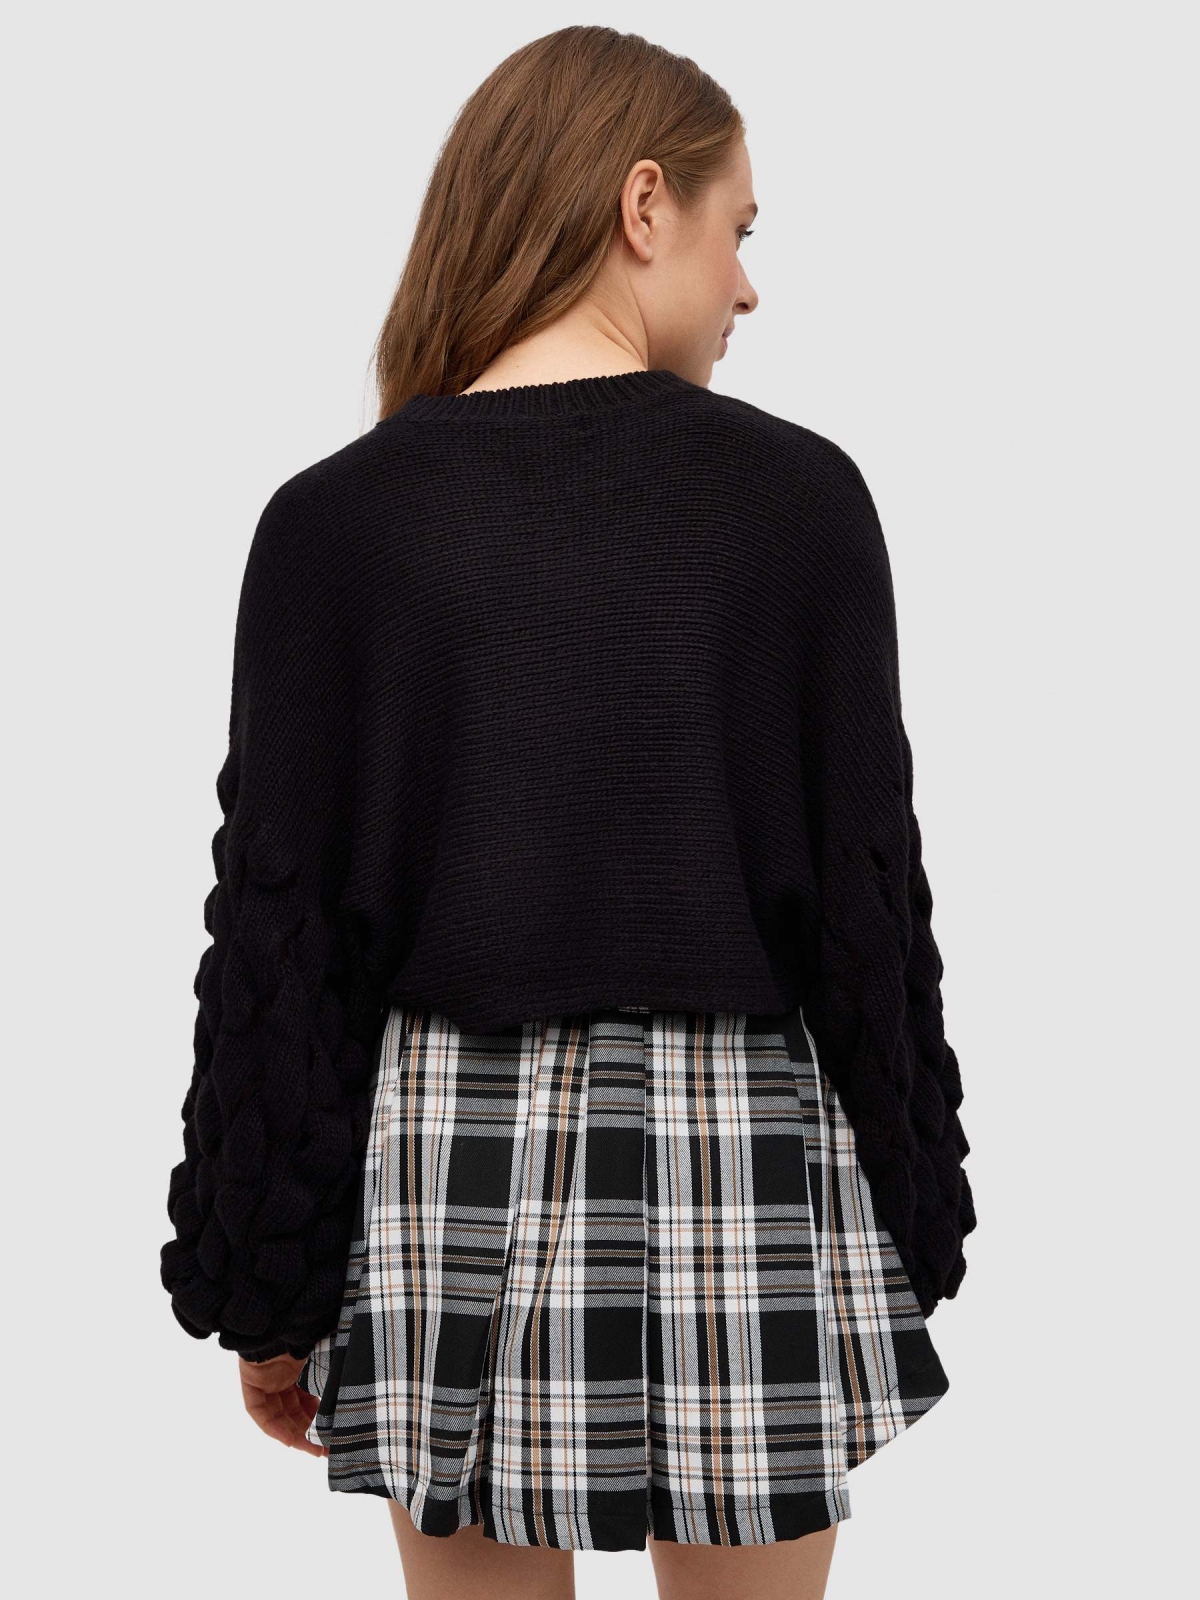 Crop sweater with puffed sleeves black middle back view